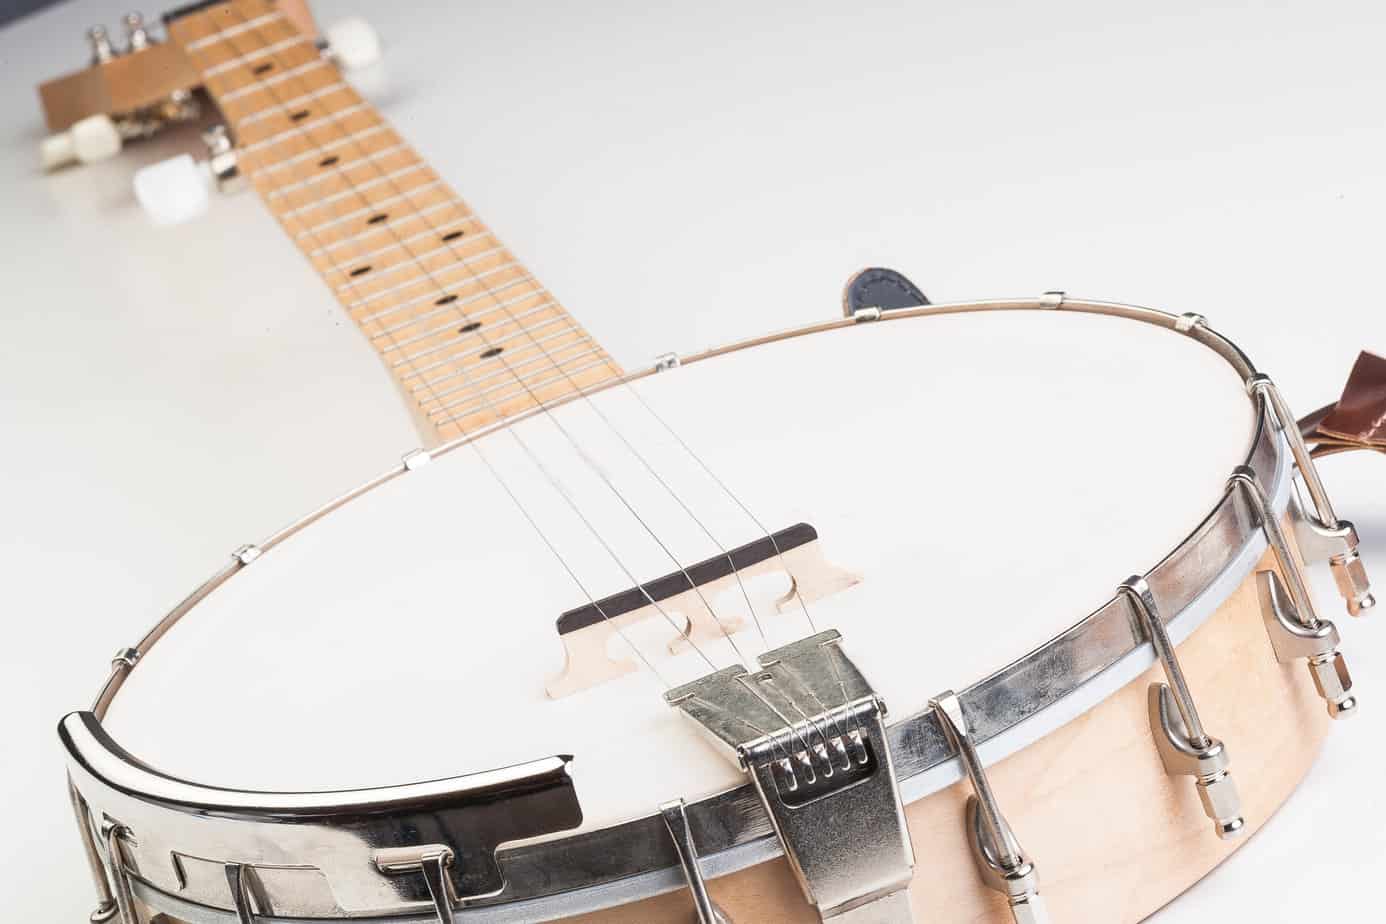 2. Placing The Strings On A 5-String Banjo